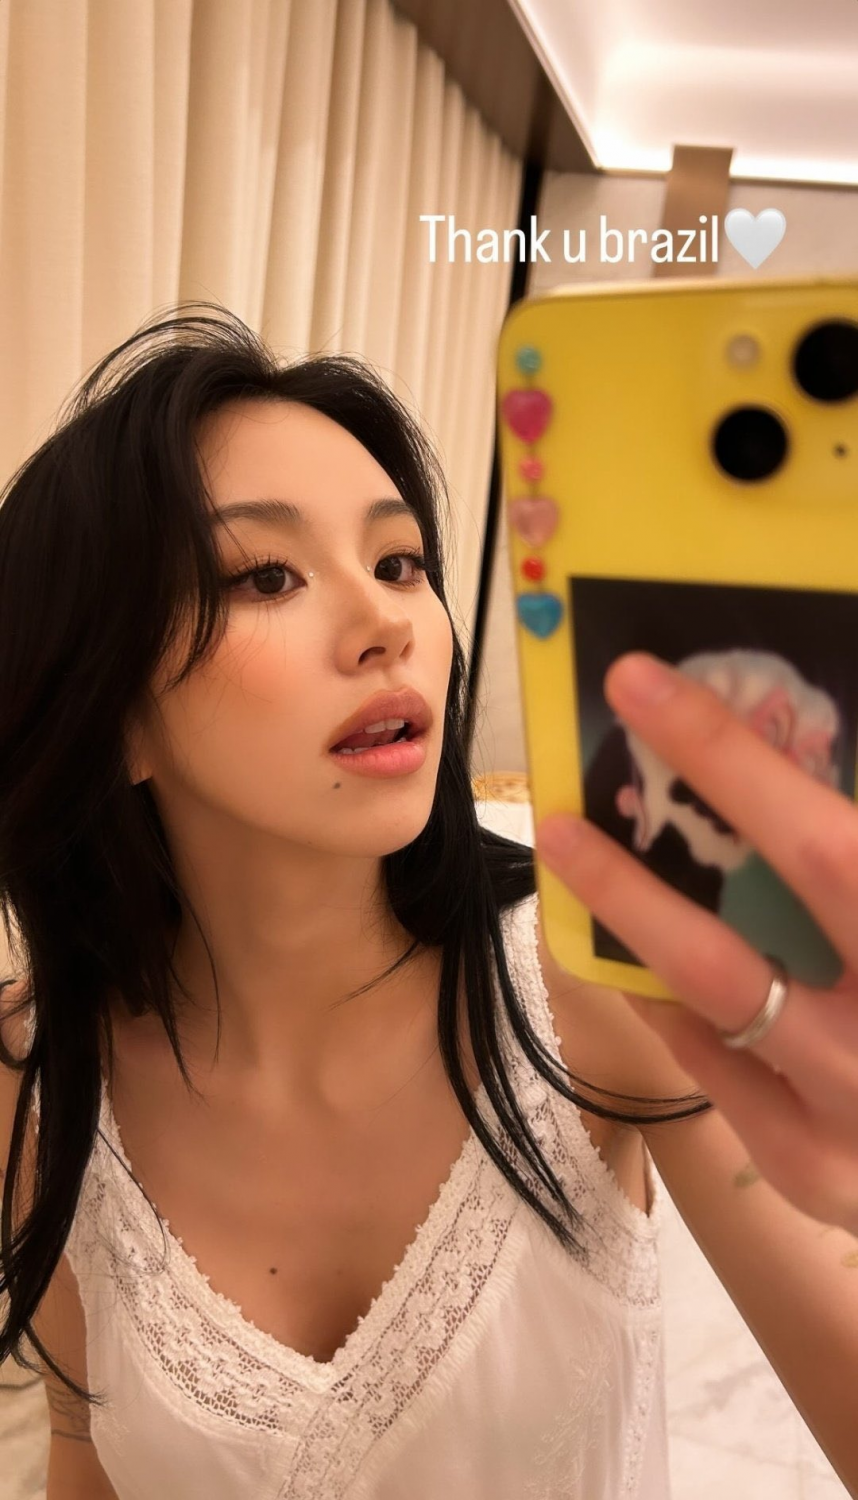 TWICE Chaeyoung Sparks Appreciation Thread Due To Stunning Beauty: 'She Got Prettier'